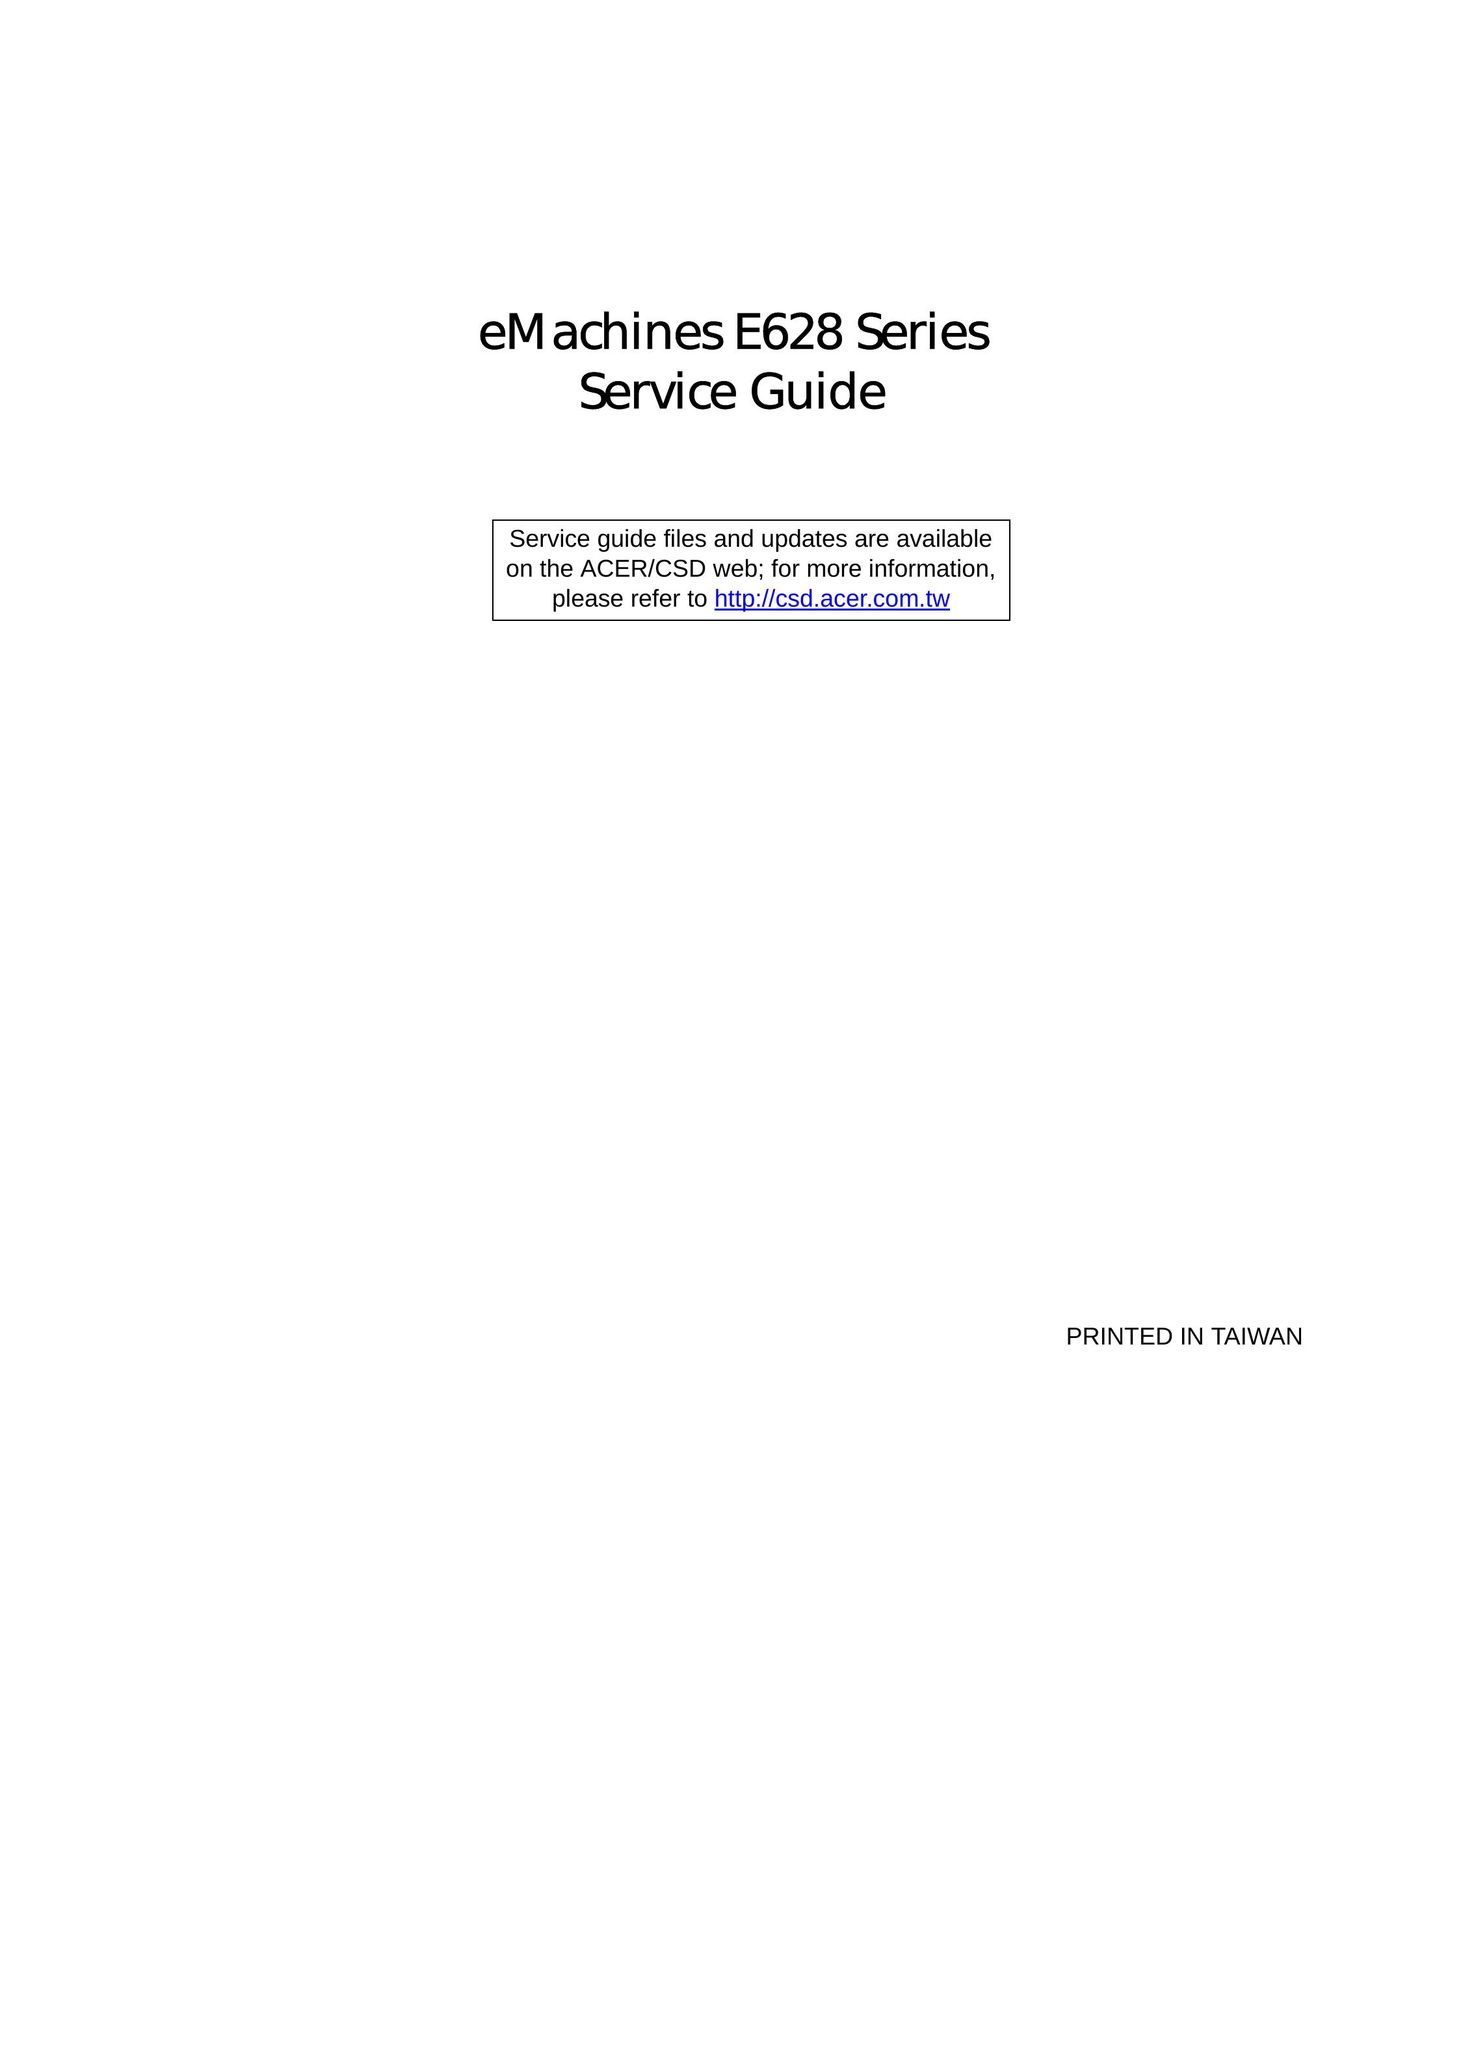 eMachines E628 Laptop User Manual